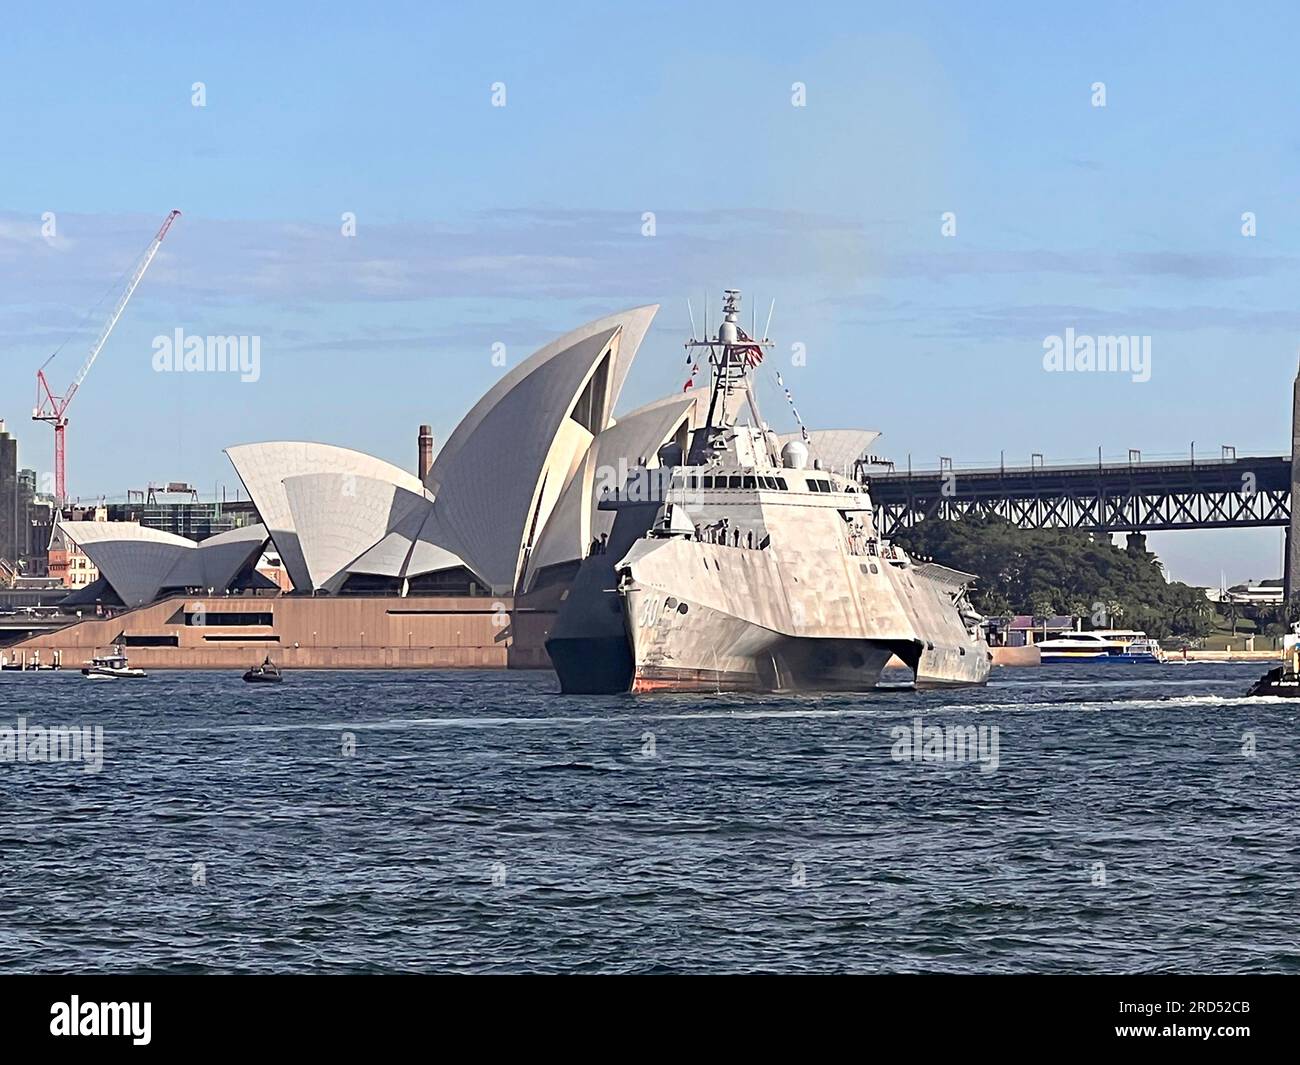 Sydney, Australia. 18th July, 2023. The U.S. Navy Independence-variant littoral combat ship USS Canberra passes the iconic Sydney Opera House as it arrives in Sydney Harbor for a commissioning ceremony, July 18, 2023 in Sydney, Australia. The USS Canberra, namesake ship of the capitol of Australia, arrive ahead of the formal commissioning on July 22. Credit: Julie Ann Ripley/Planetpix/Alamy Live News Credit: Julie Ann Ripley/Planetpix/Alamy Live News Credit: Planetpix/Alamy Live News Stock Photo